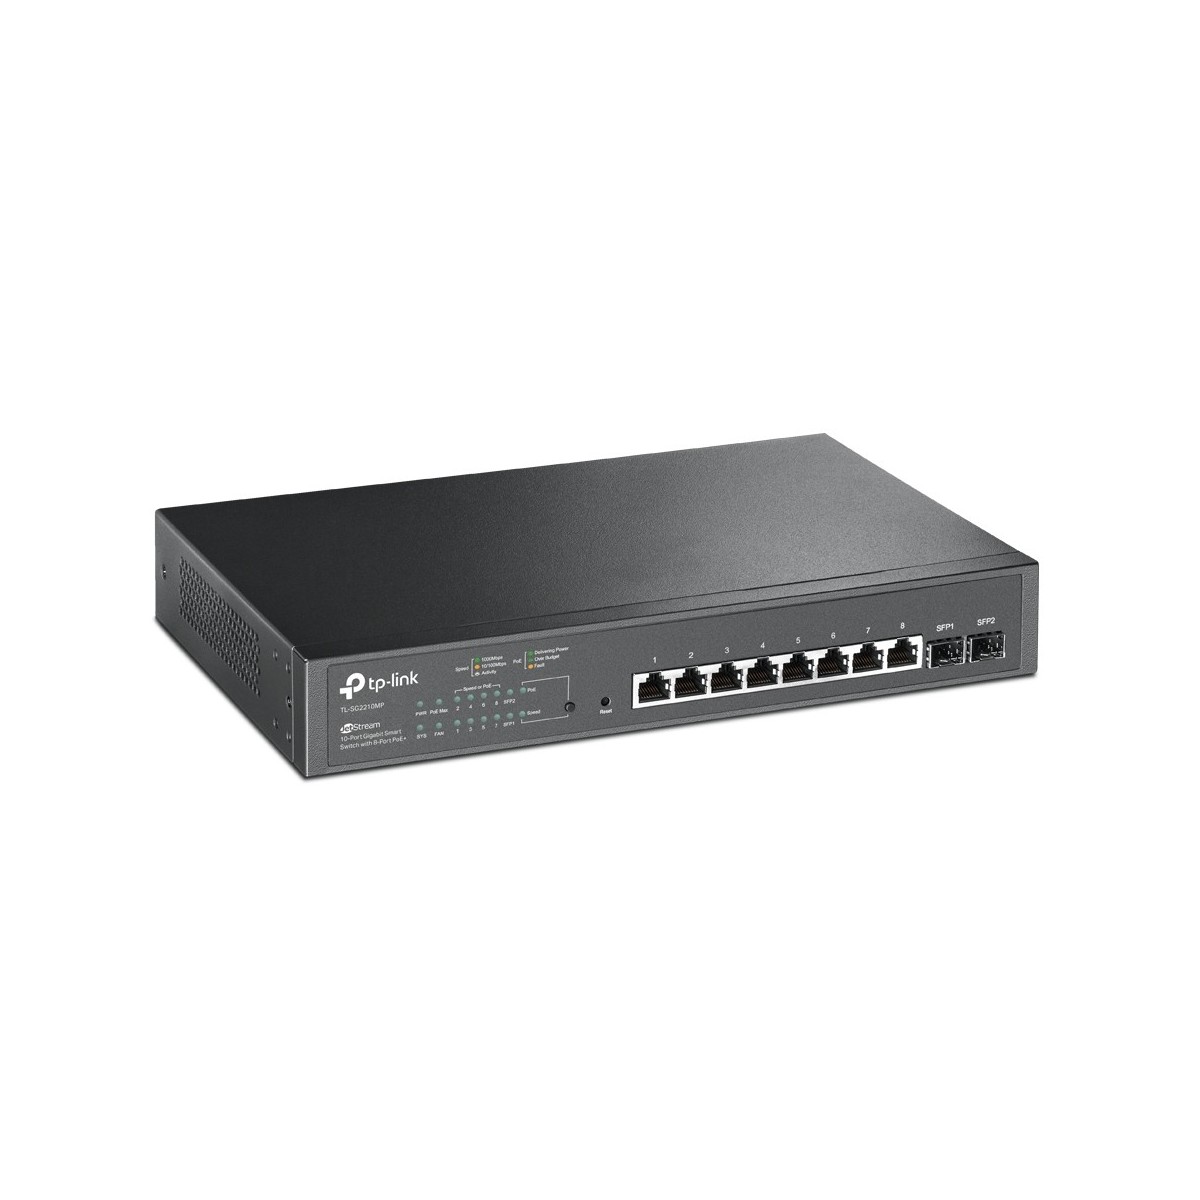 SWITCH - TL-SG2210MP - 10 Port - Manageable - 4 Layer Sypport - 150W PoE - Ethernet - Twisted Pair